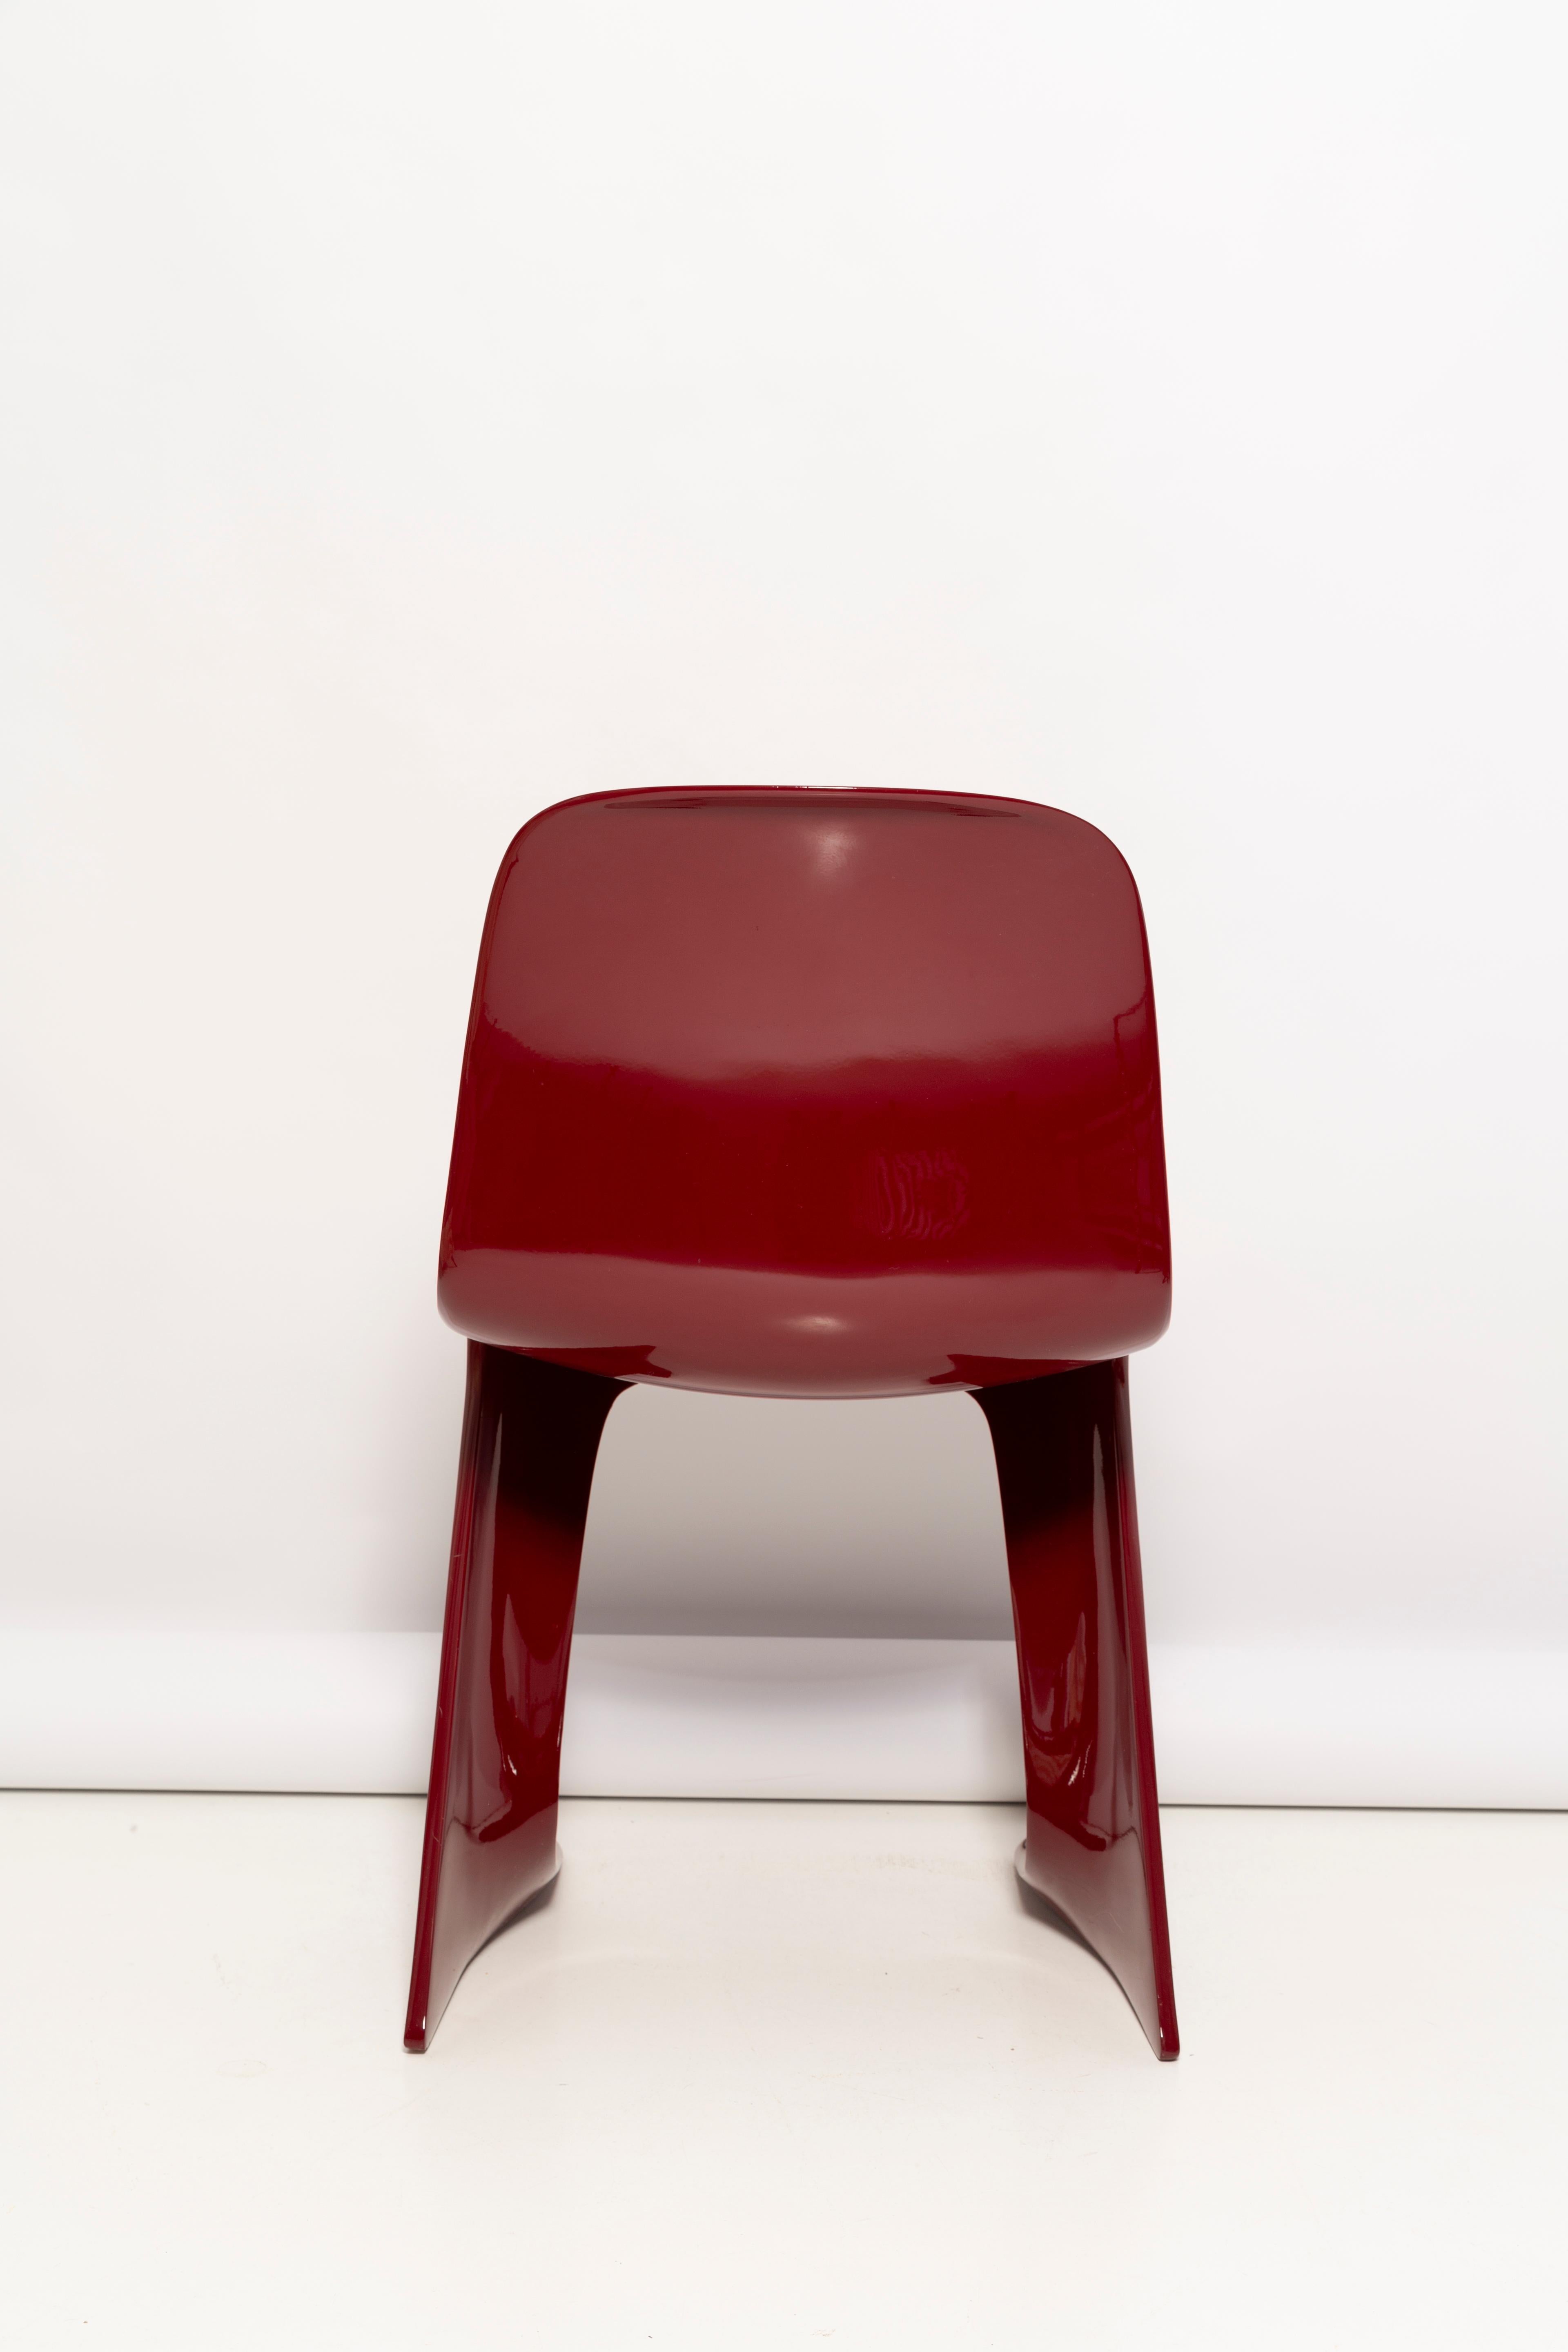 Pair of Dark Red Wine Kangaroo Chairs Designed by Ernst Moeckl, Germany, 1968 For Sale 1